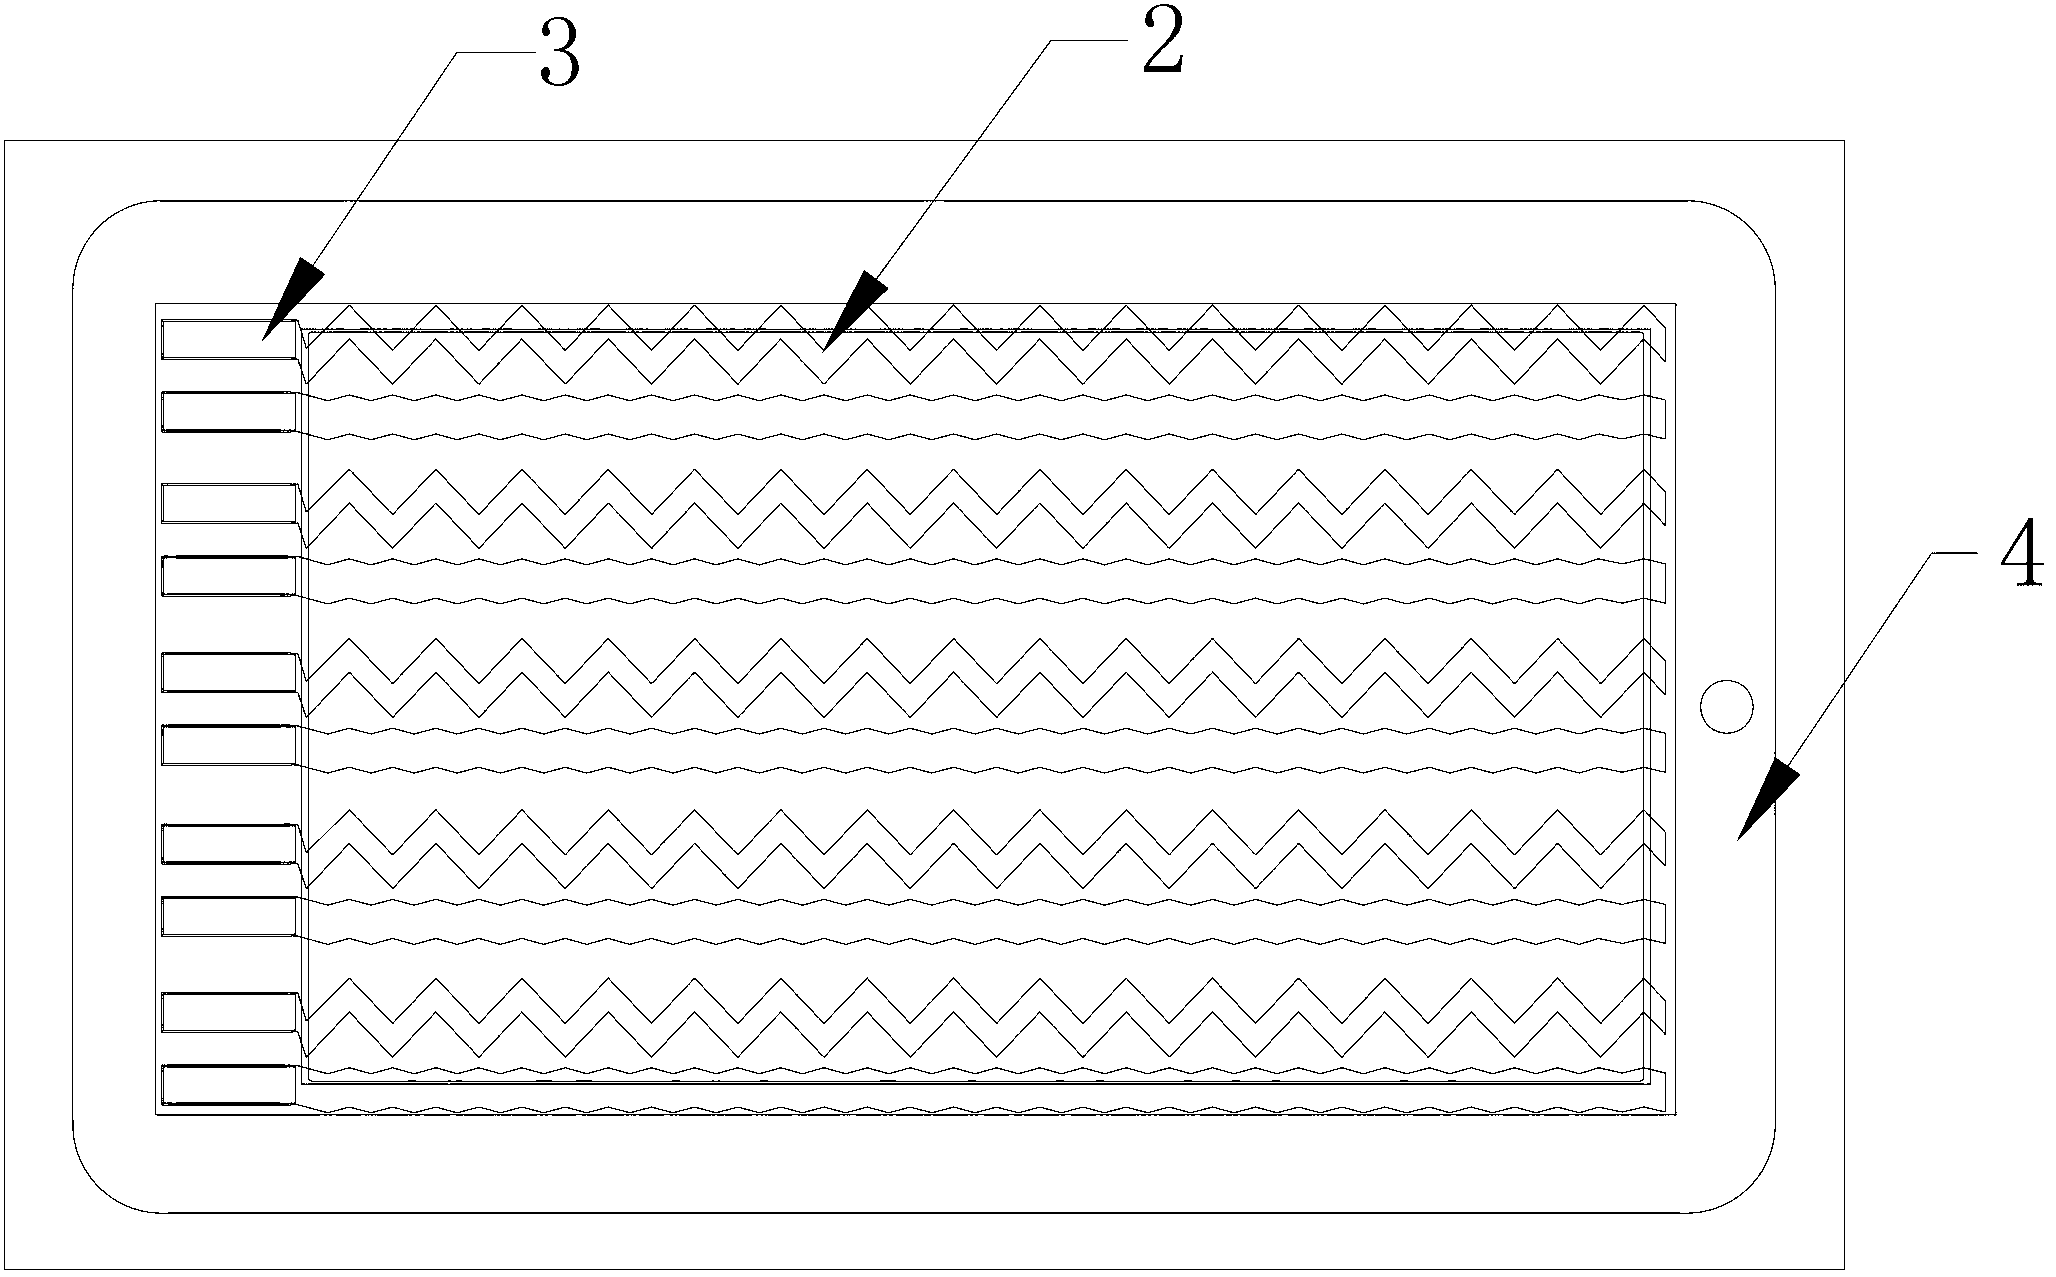 OGS (one glass solution) capacitive touch screen and method for manufacturing same